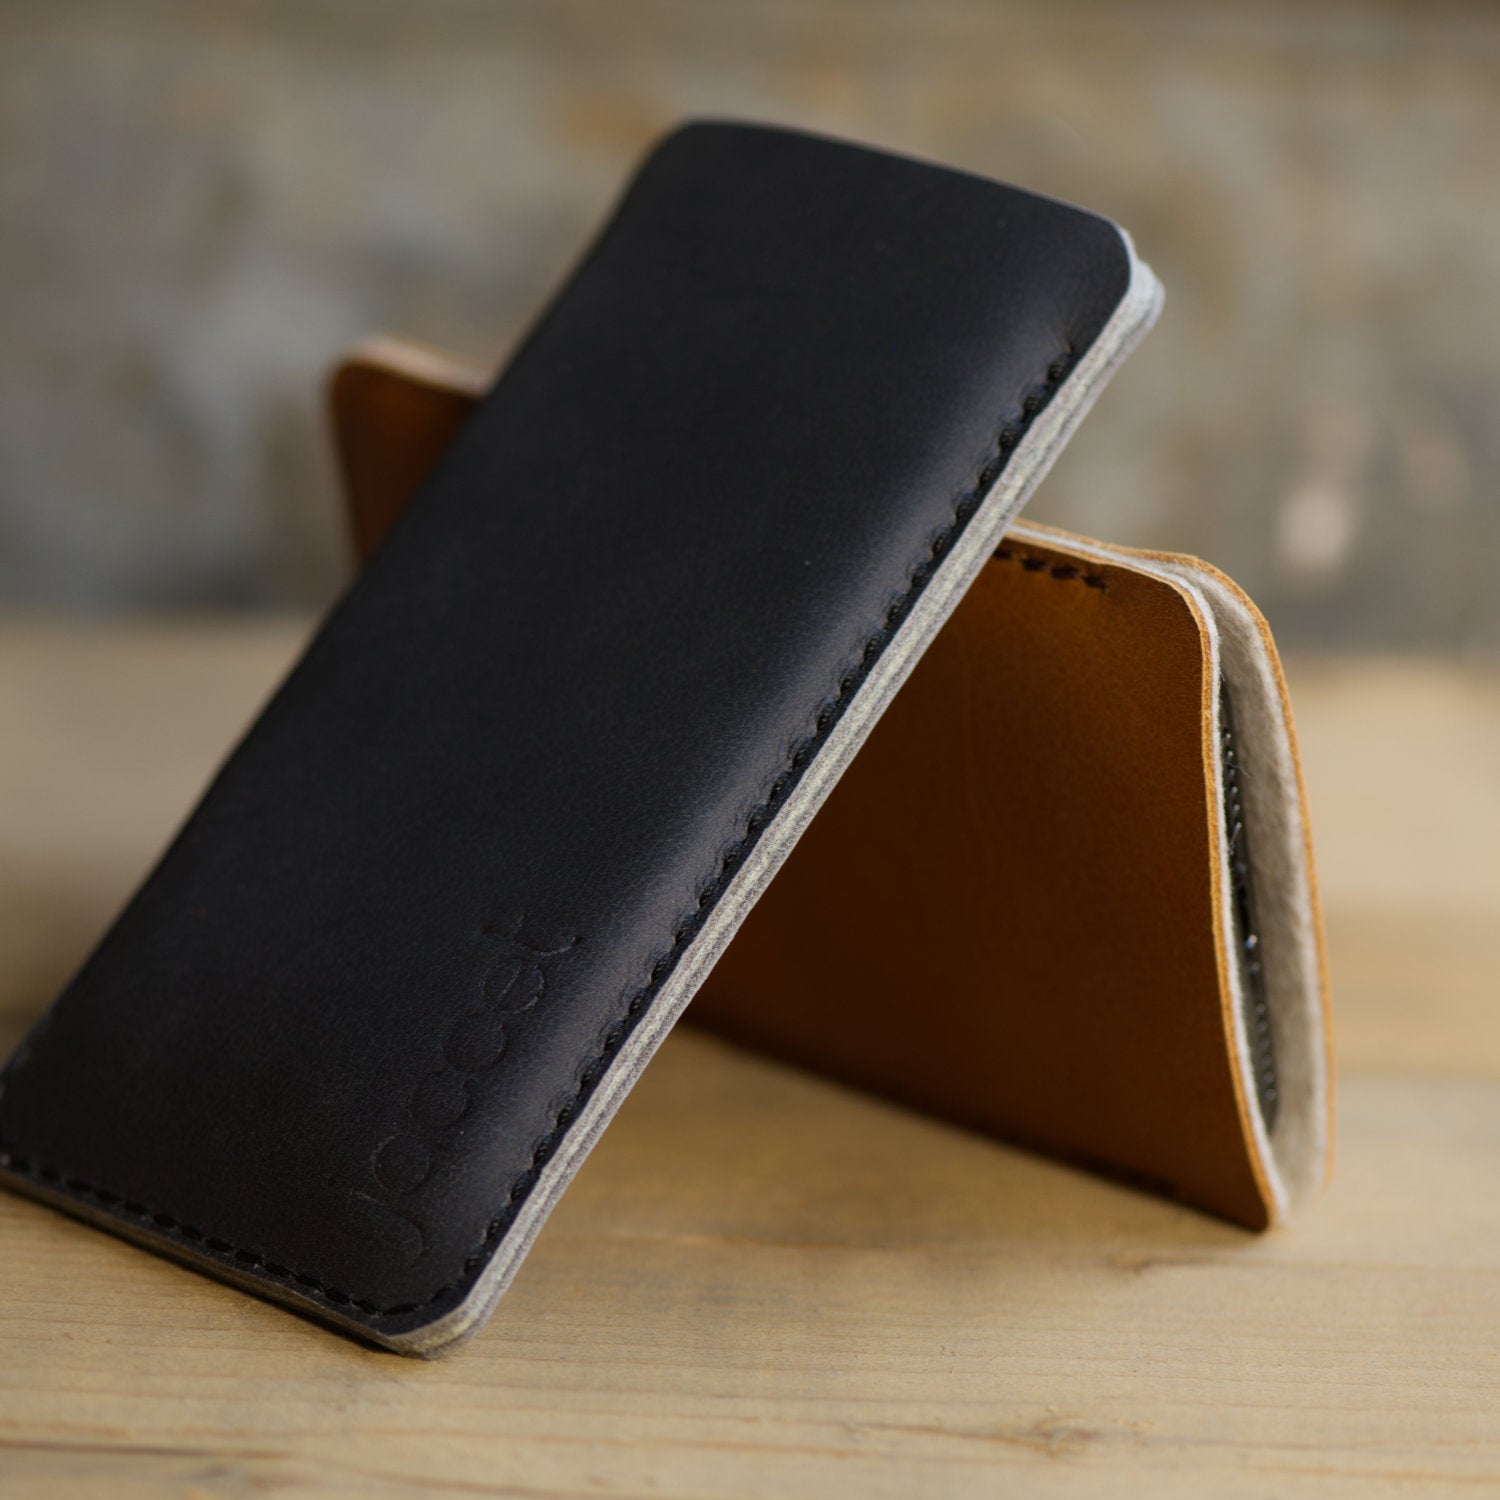 JACCET leather OPPO sleeve - anthracite/black leather with grey wool felt. 100% Handmade